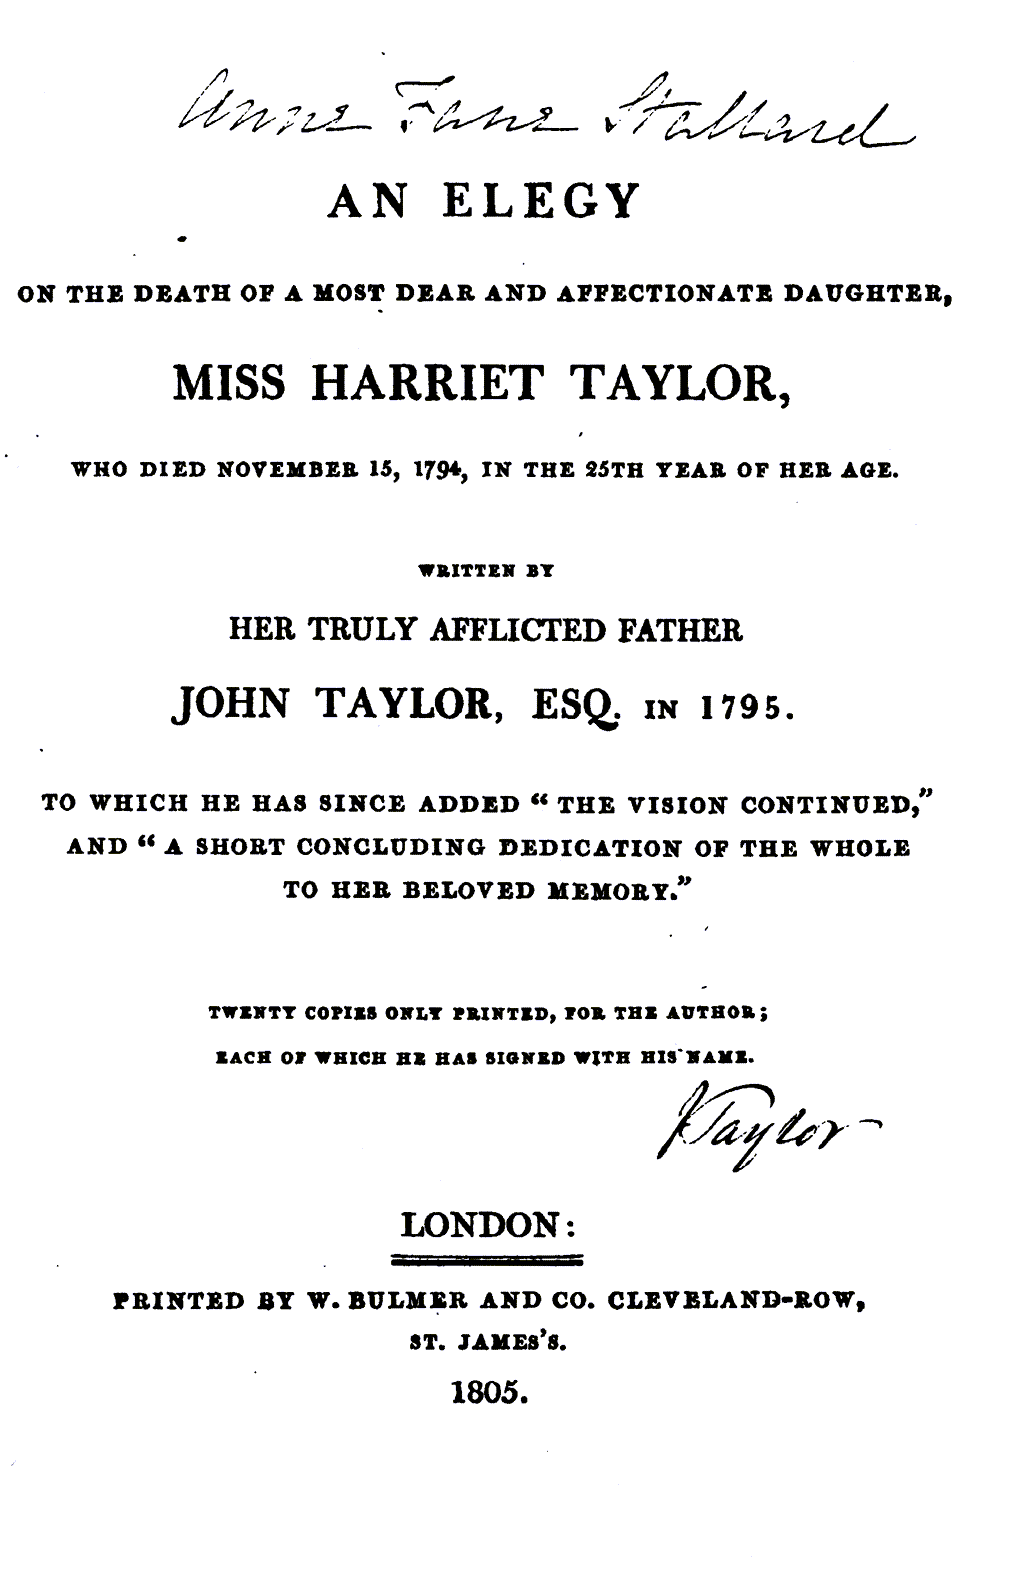 Figure 6: Frontispiece of the “Elegy” written by John Taylor on the death of his daughter Harriet